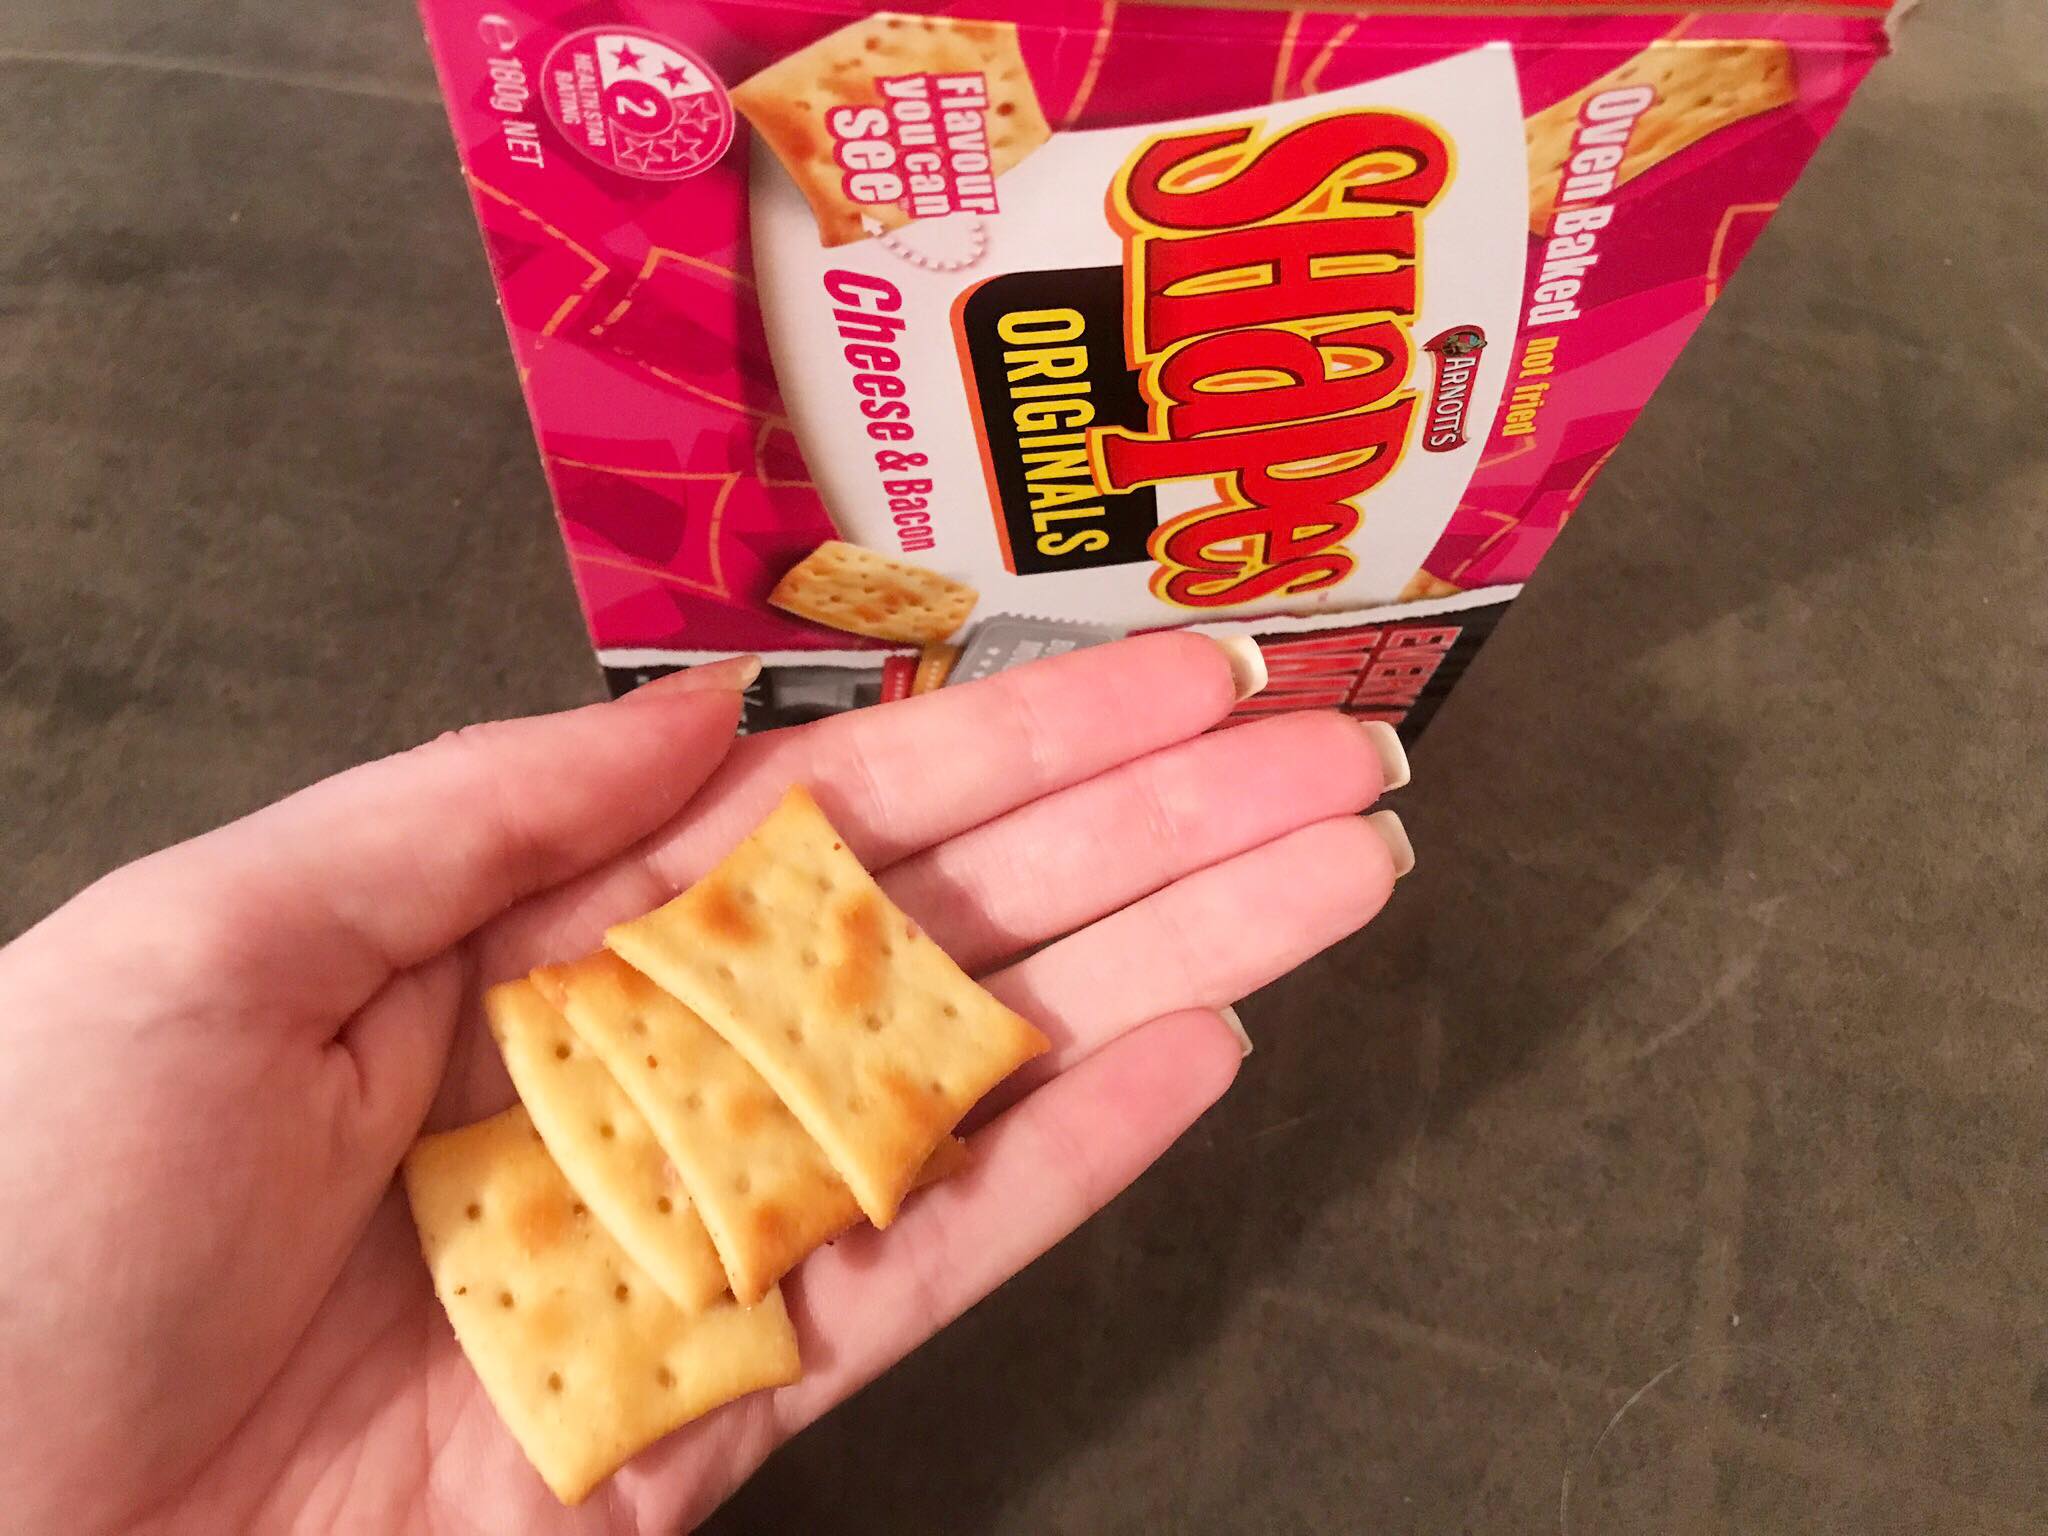 arnott's shapes flavours ranked